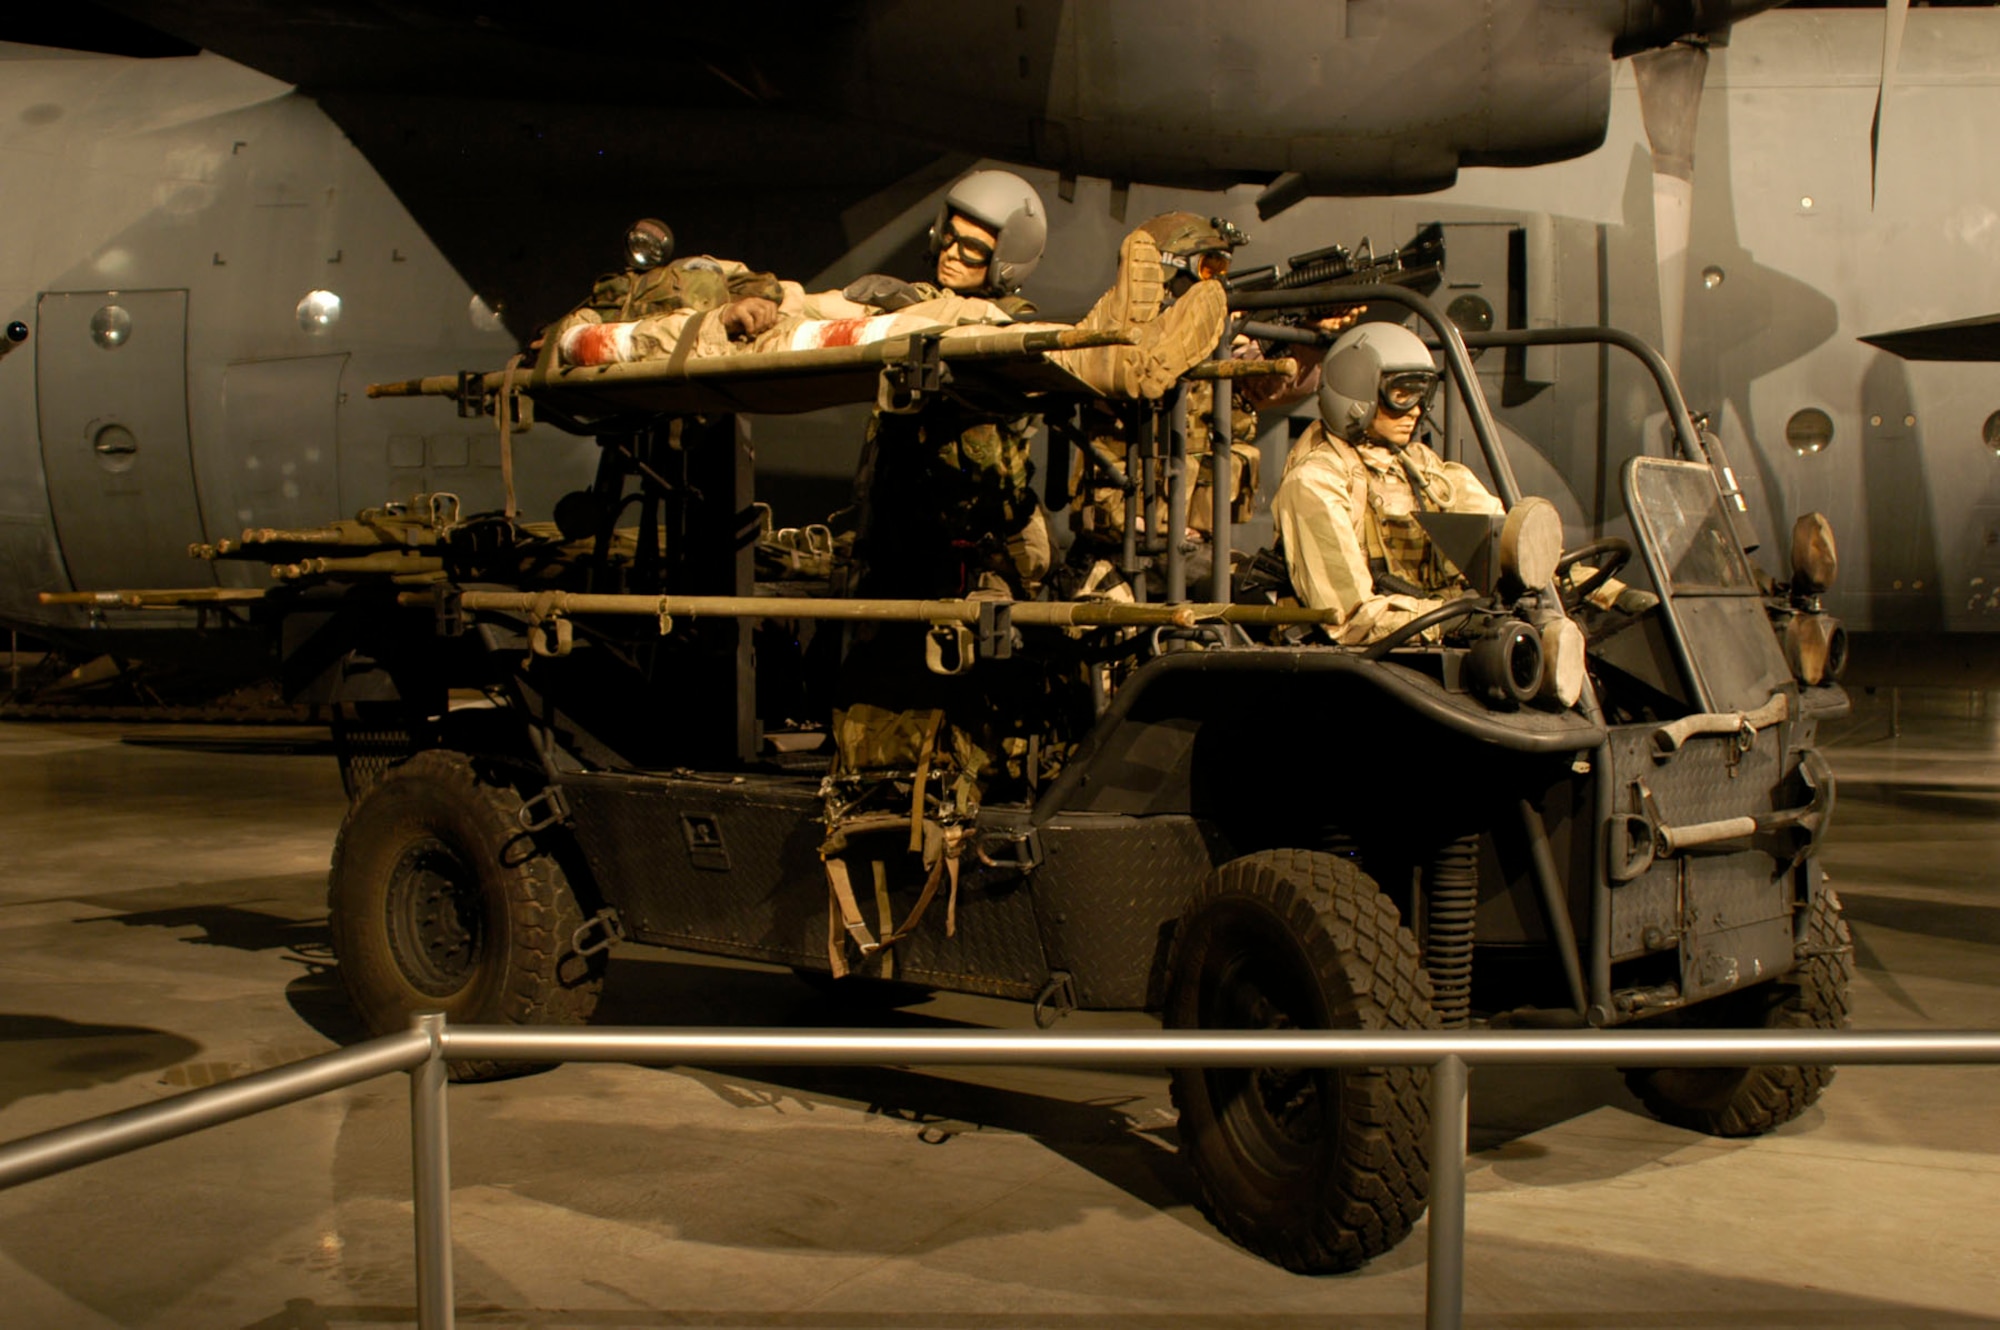 DAYTON, Ohio - The R-1 Rescue All Terrain Transport (RATT) vehicle on display in the Cold War Gallery at the National Museum of the U.S. Air Force. (U.S. Air Force photo)